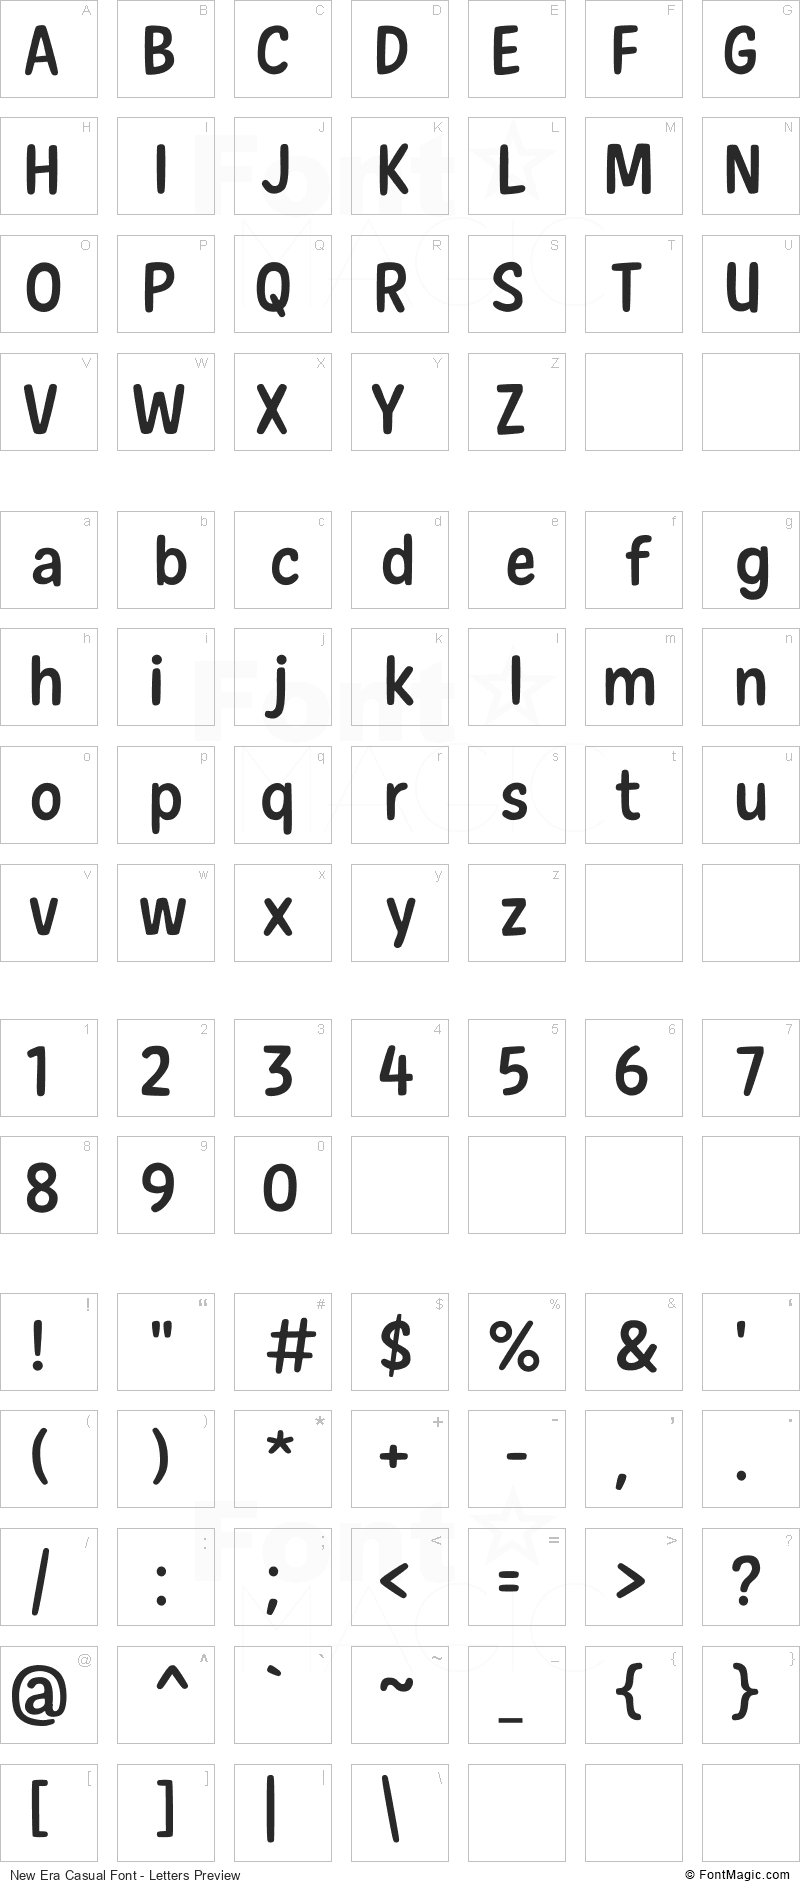 New Era Casual Font - All Latters Preview Chart